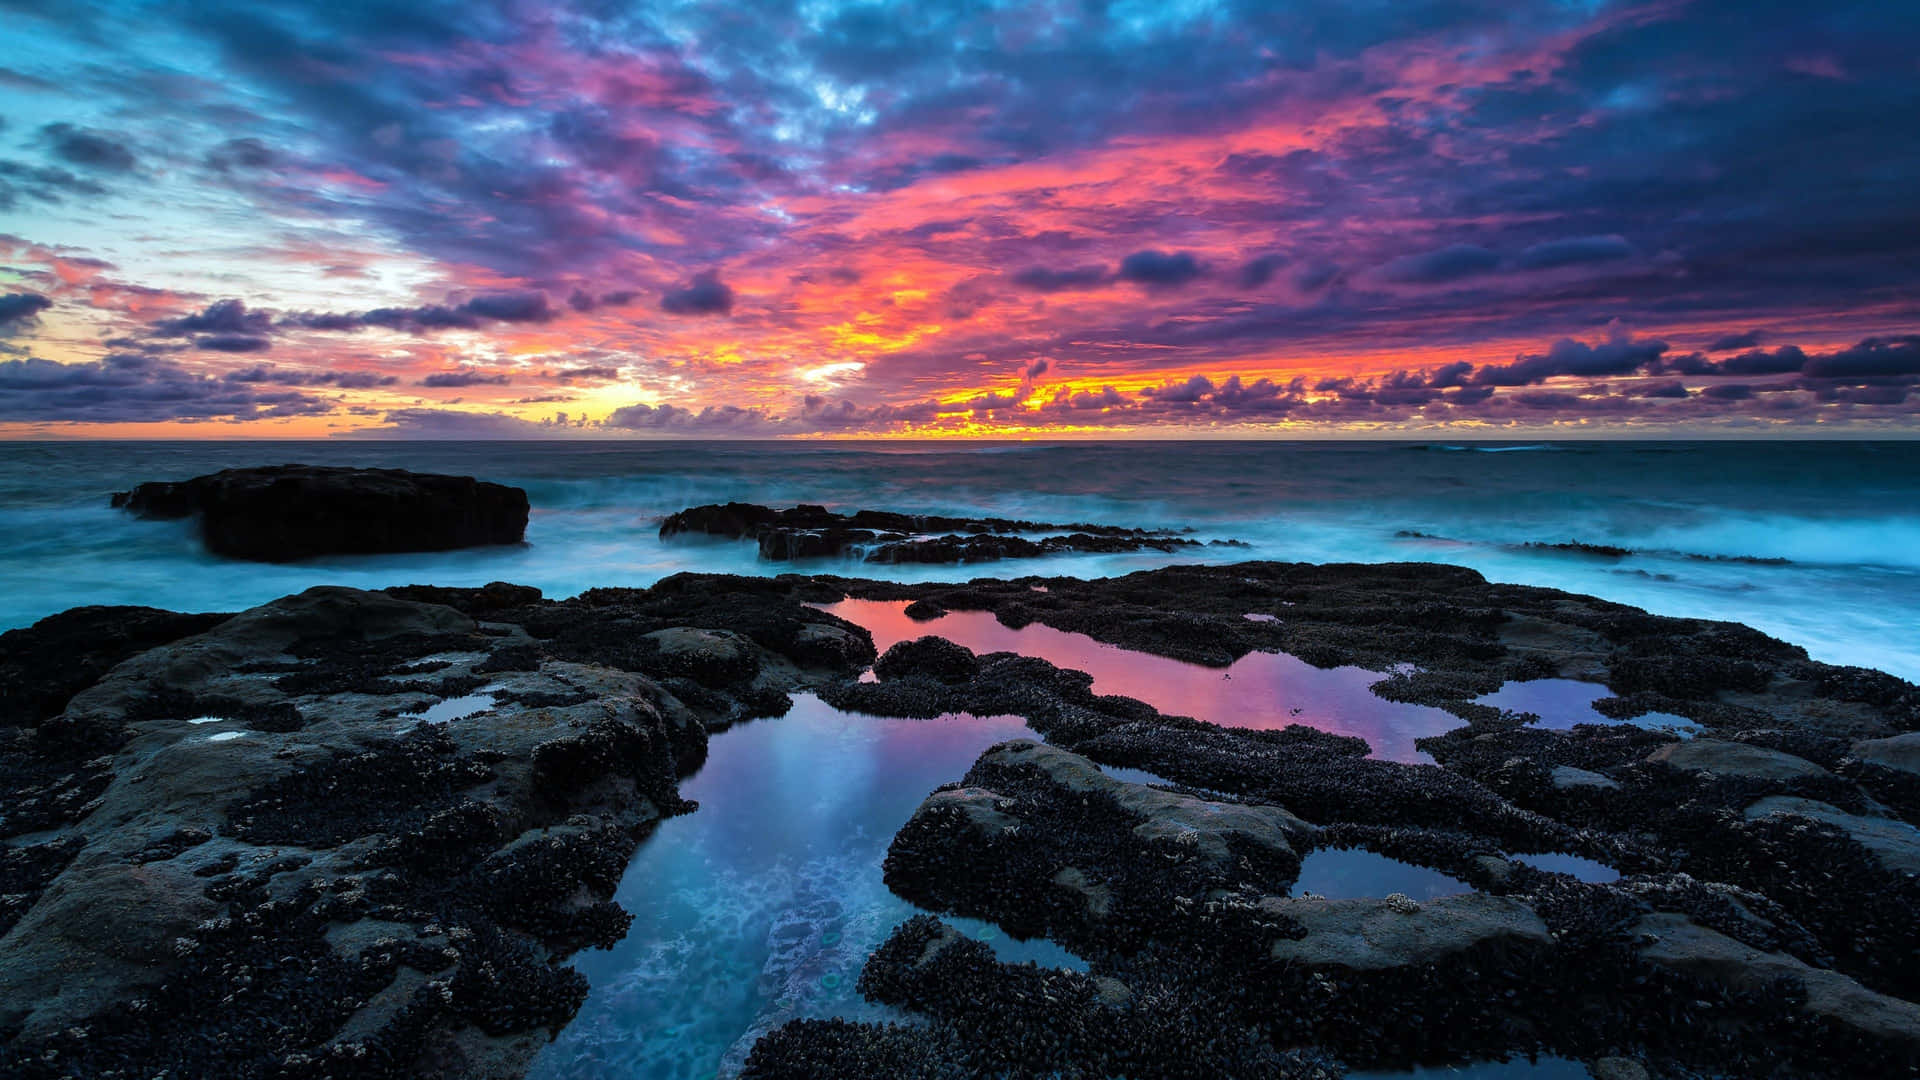 A Colorful Sunset Over Rocks And Water